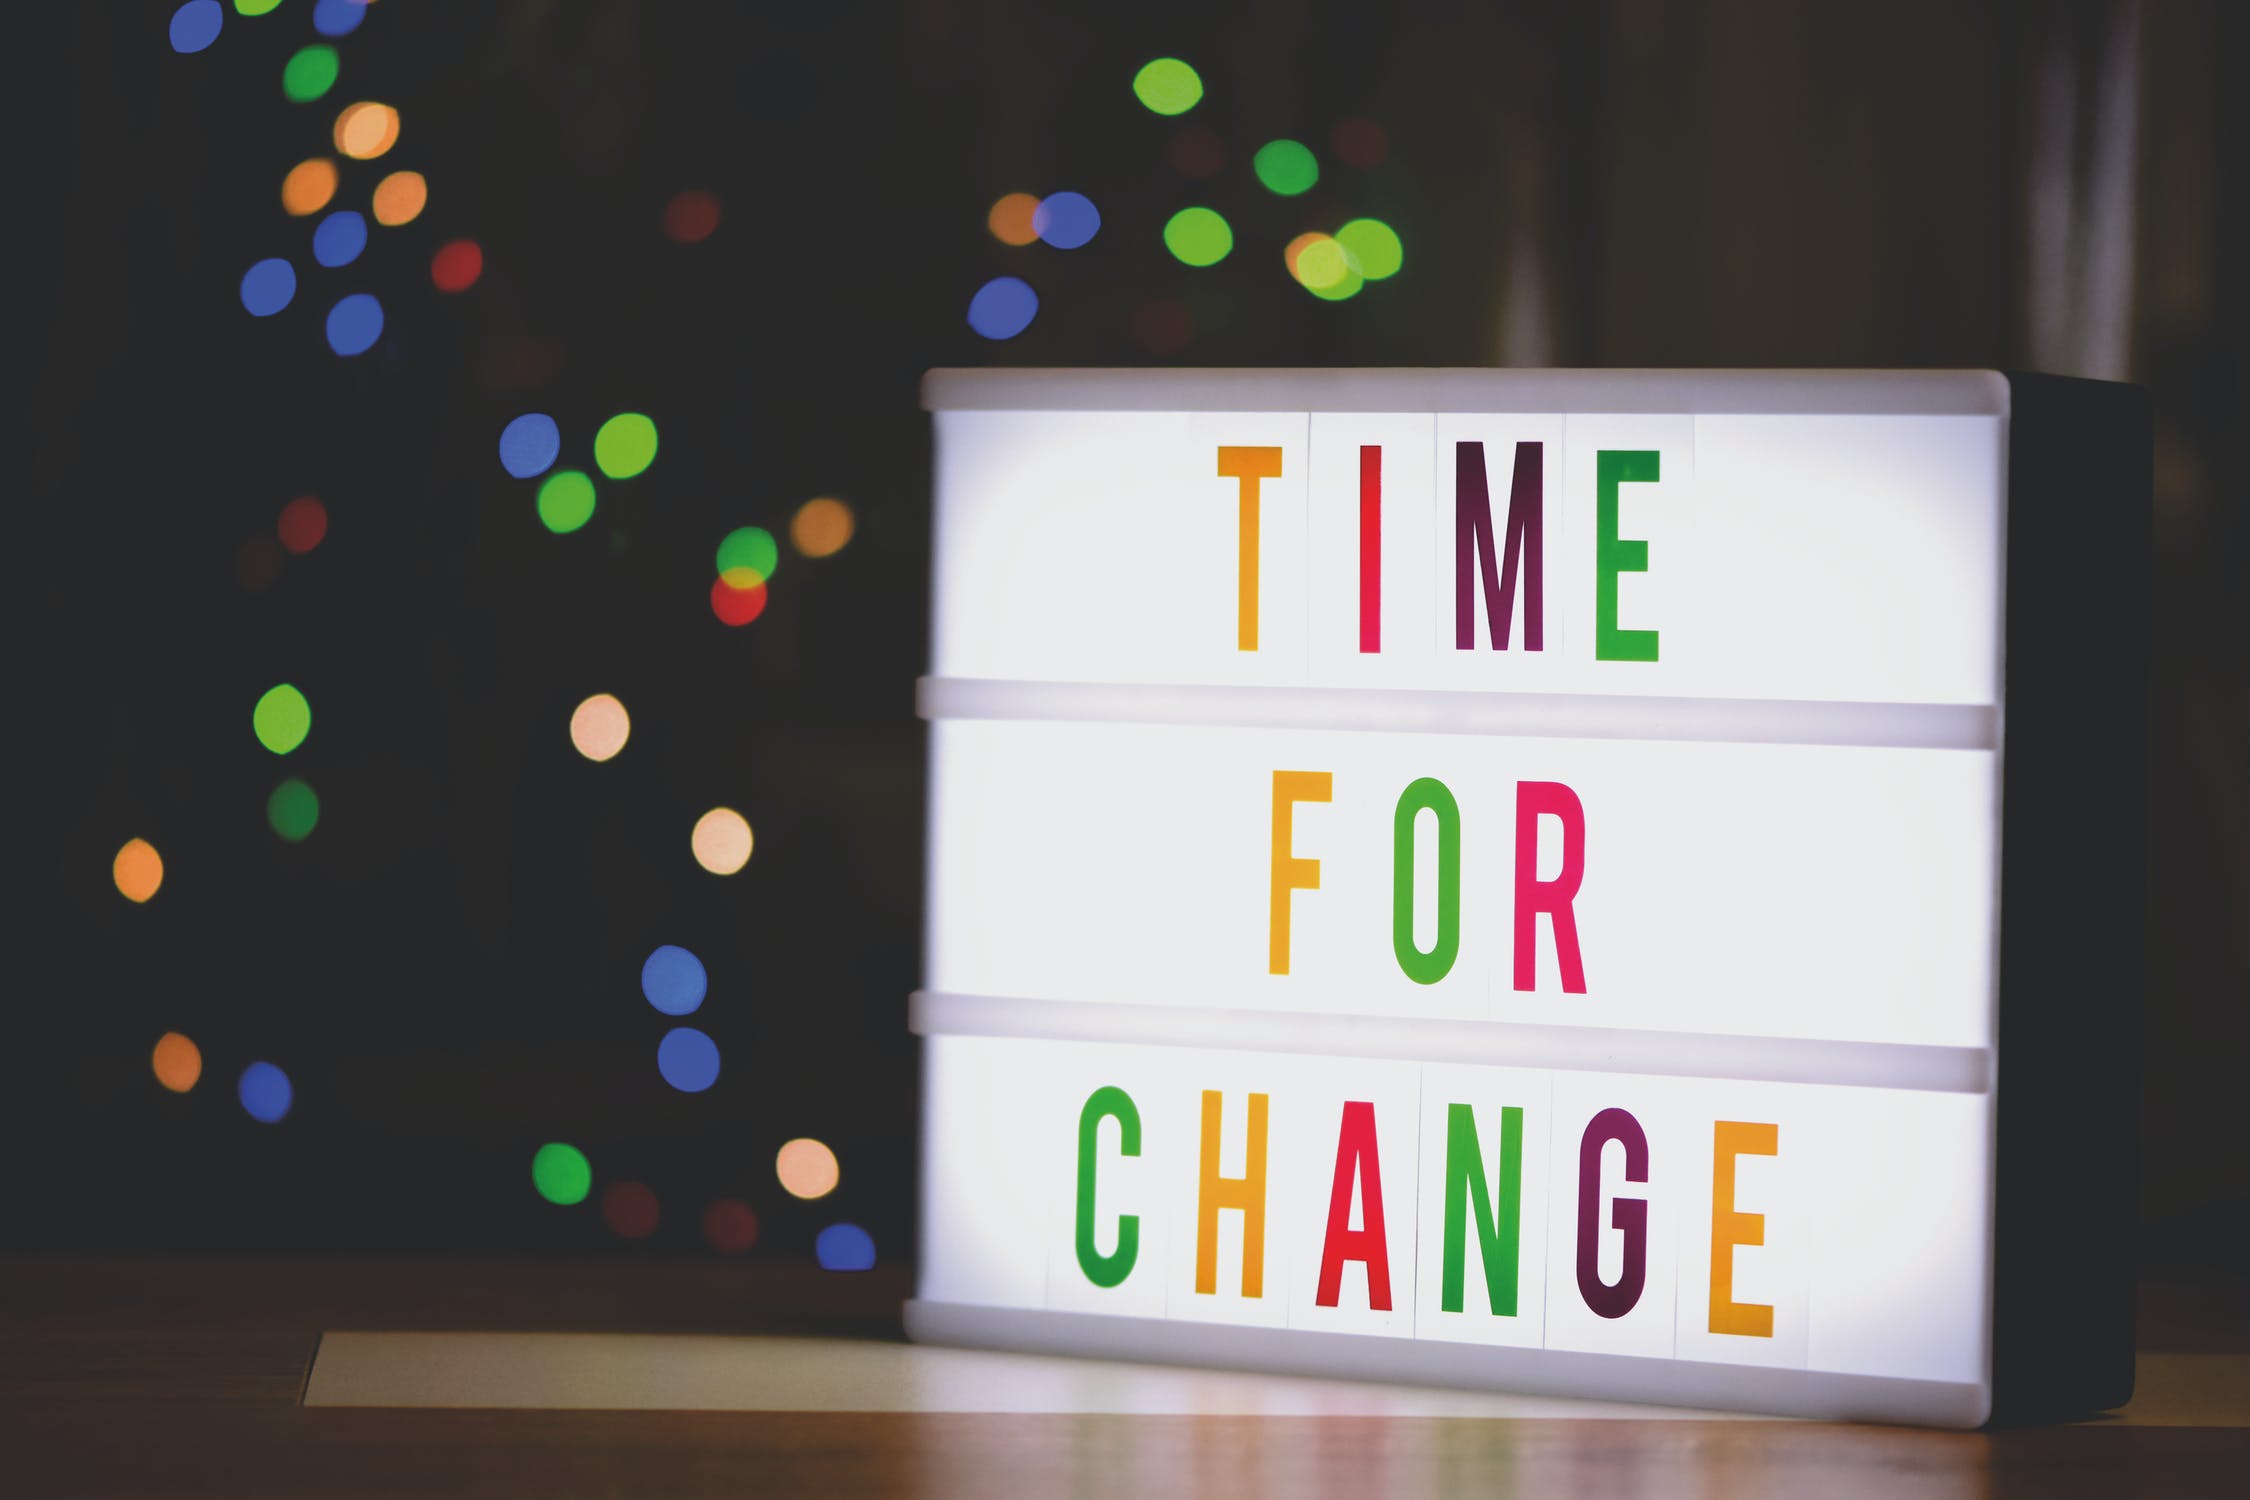 Image shows a light box with the writing "Time for Change"